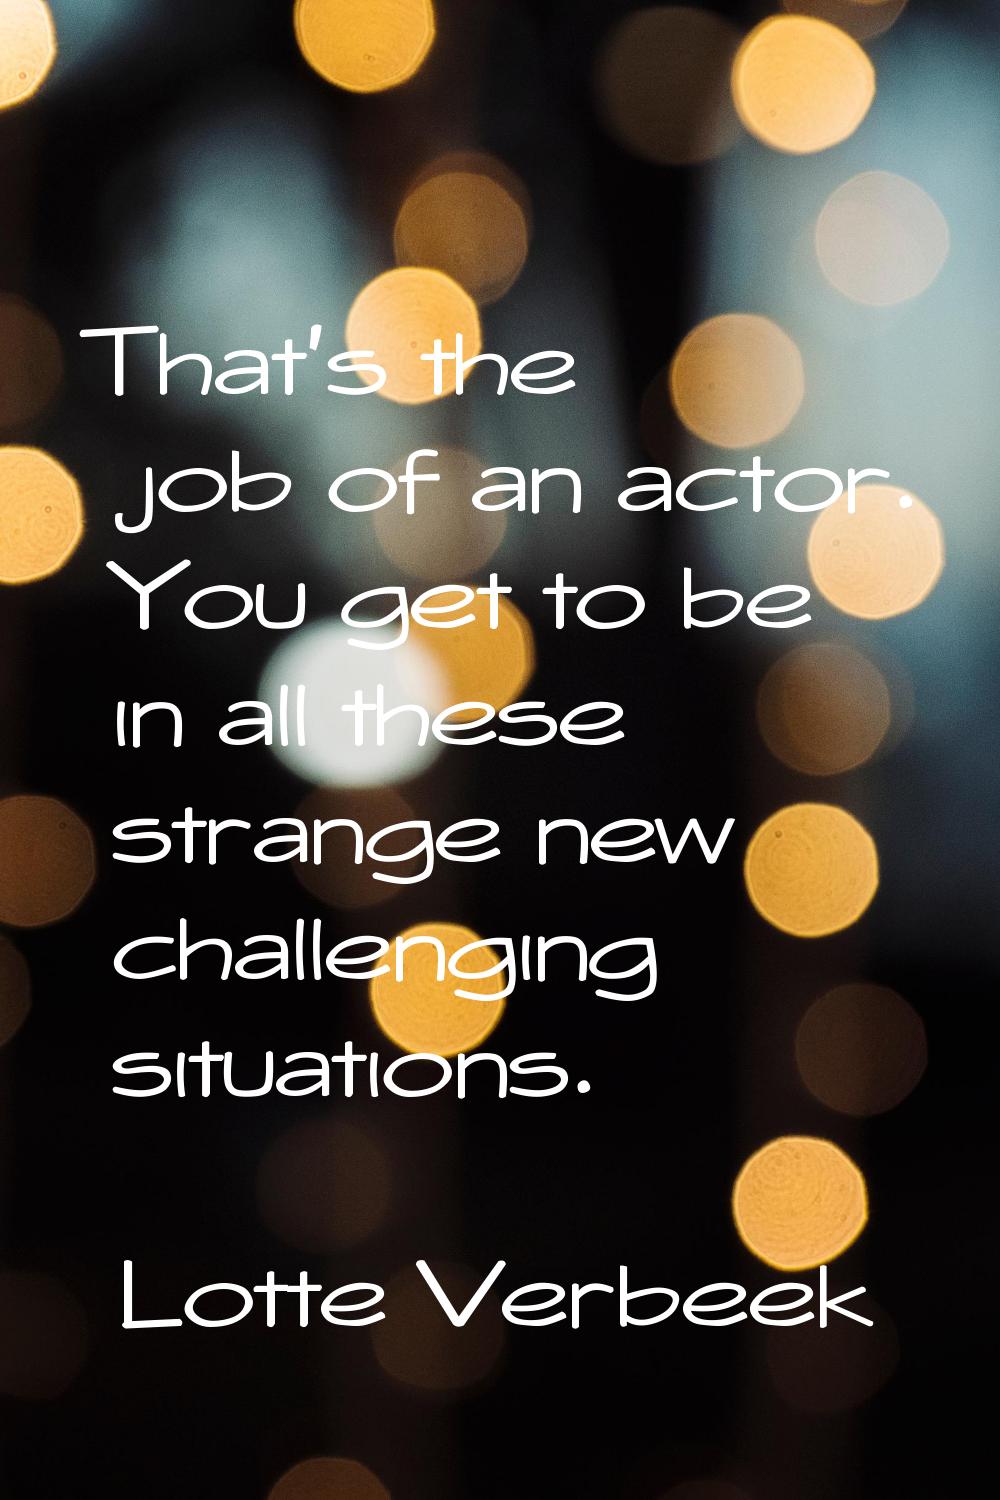 That's the job of an actor. You get to be in all these strange new challenging situations.